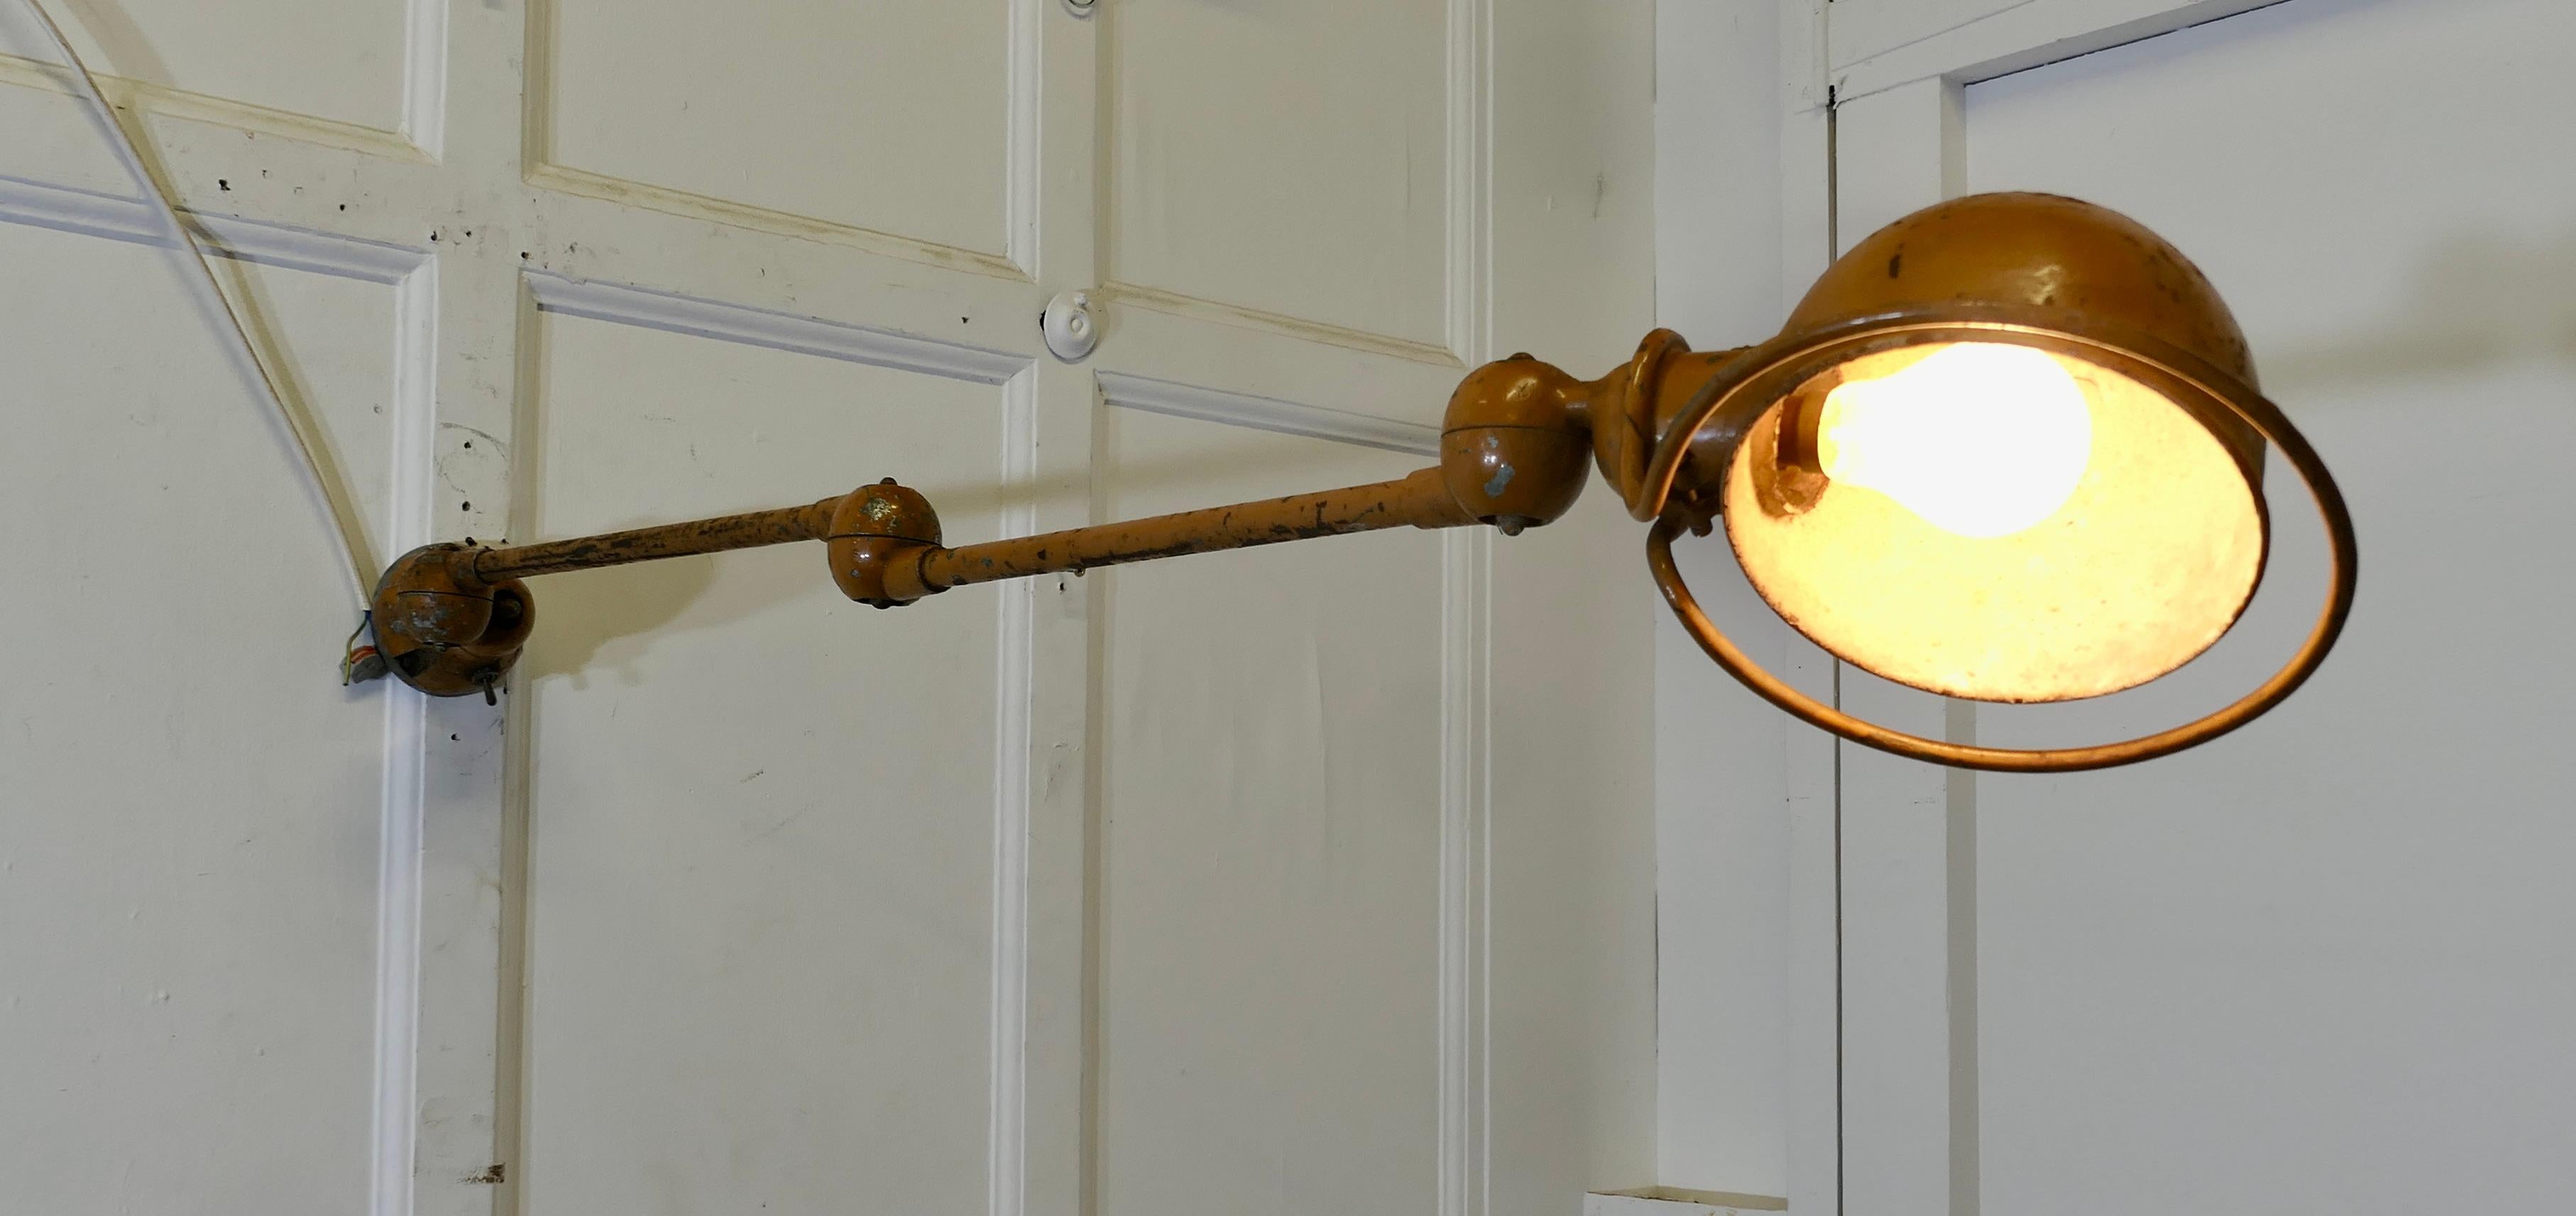 Mid-20th Century French Vintage Industrial Jielde Articulated Wall Light Sconce  This is a very u For Sale